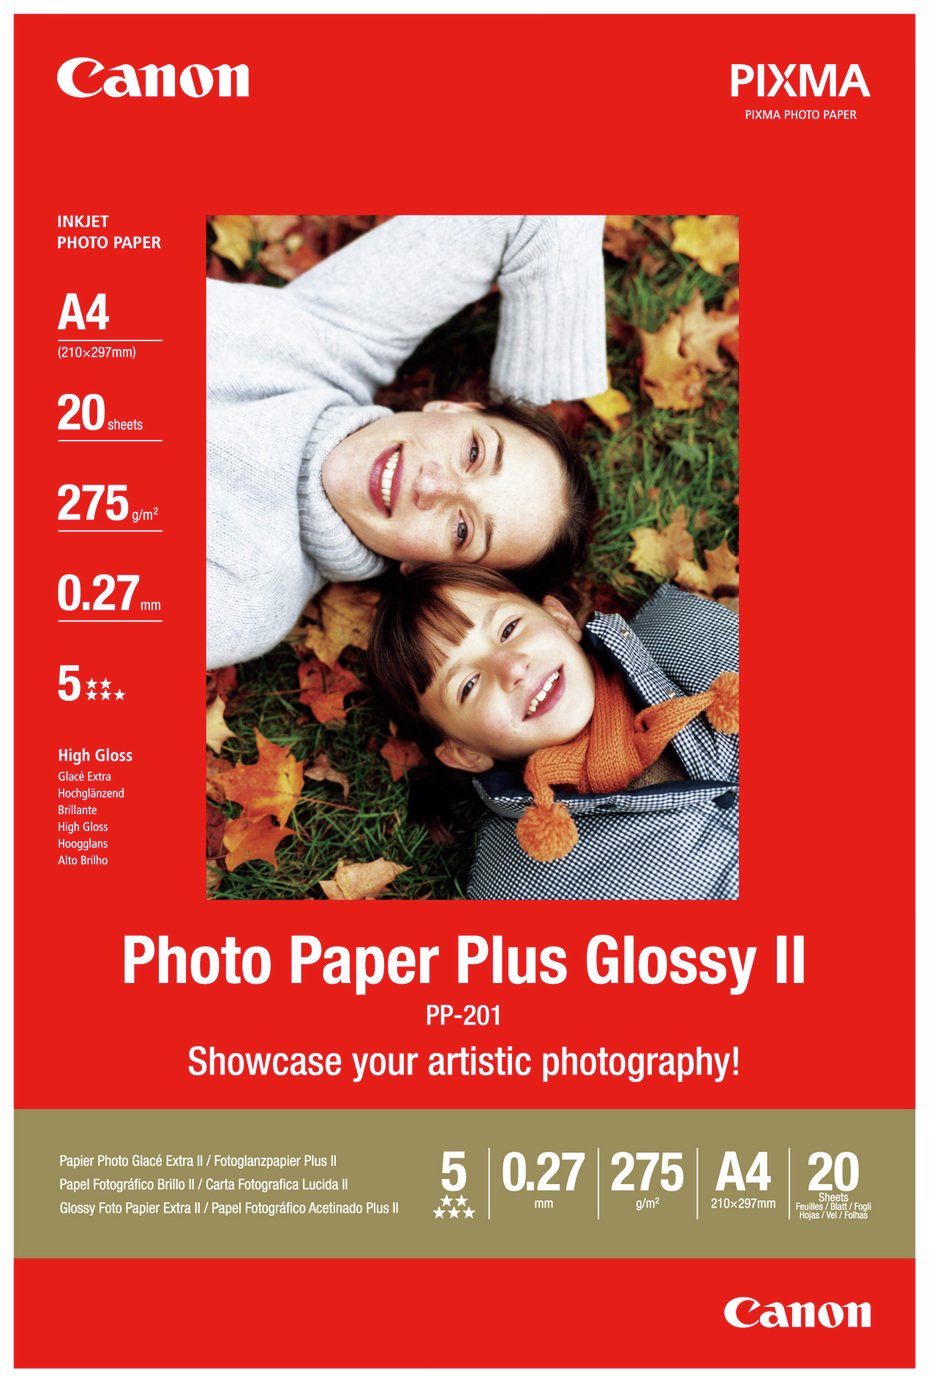 Canon A4 Photo Paper Plus Glossy II- 20 Sheets Review